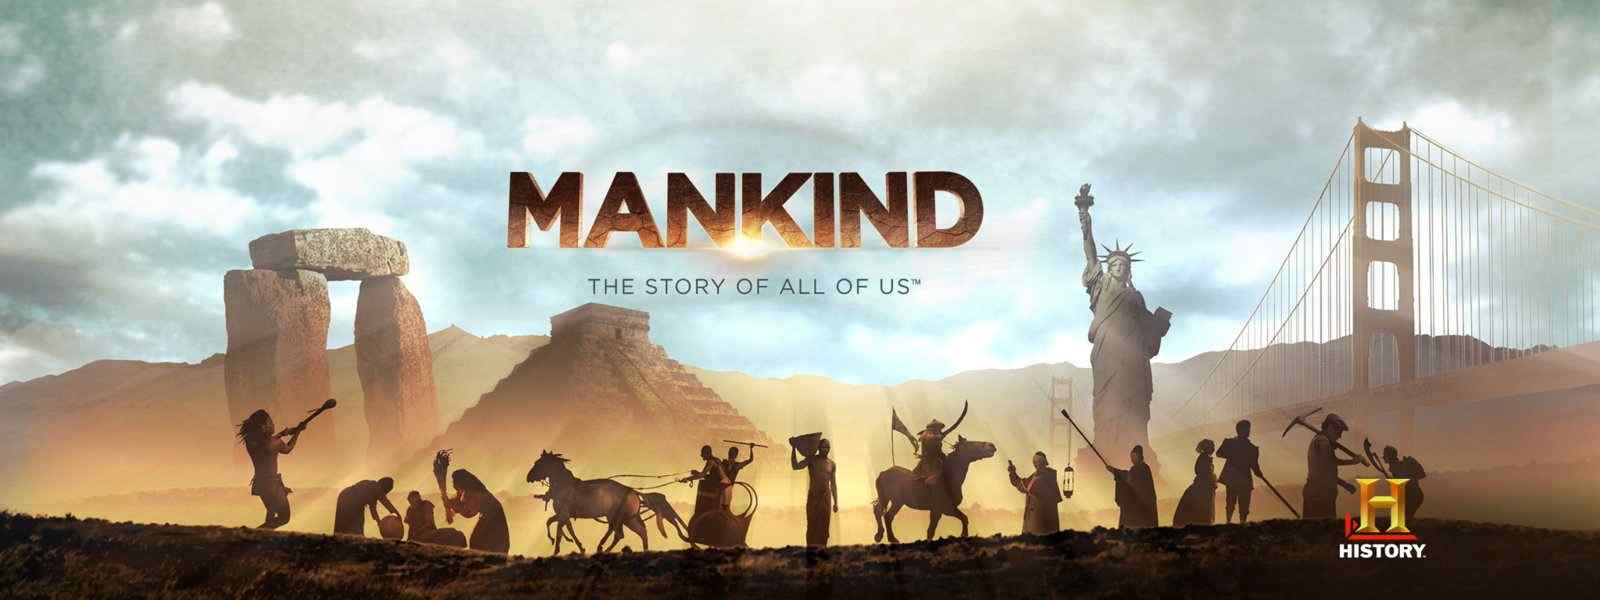  Mankind The Story Of All Of Us Episode 1 Mankind The Story Of All Of Us 2022 11 21